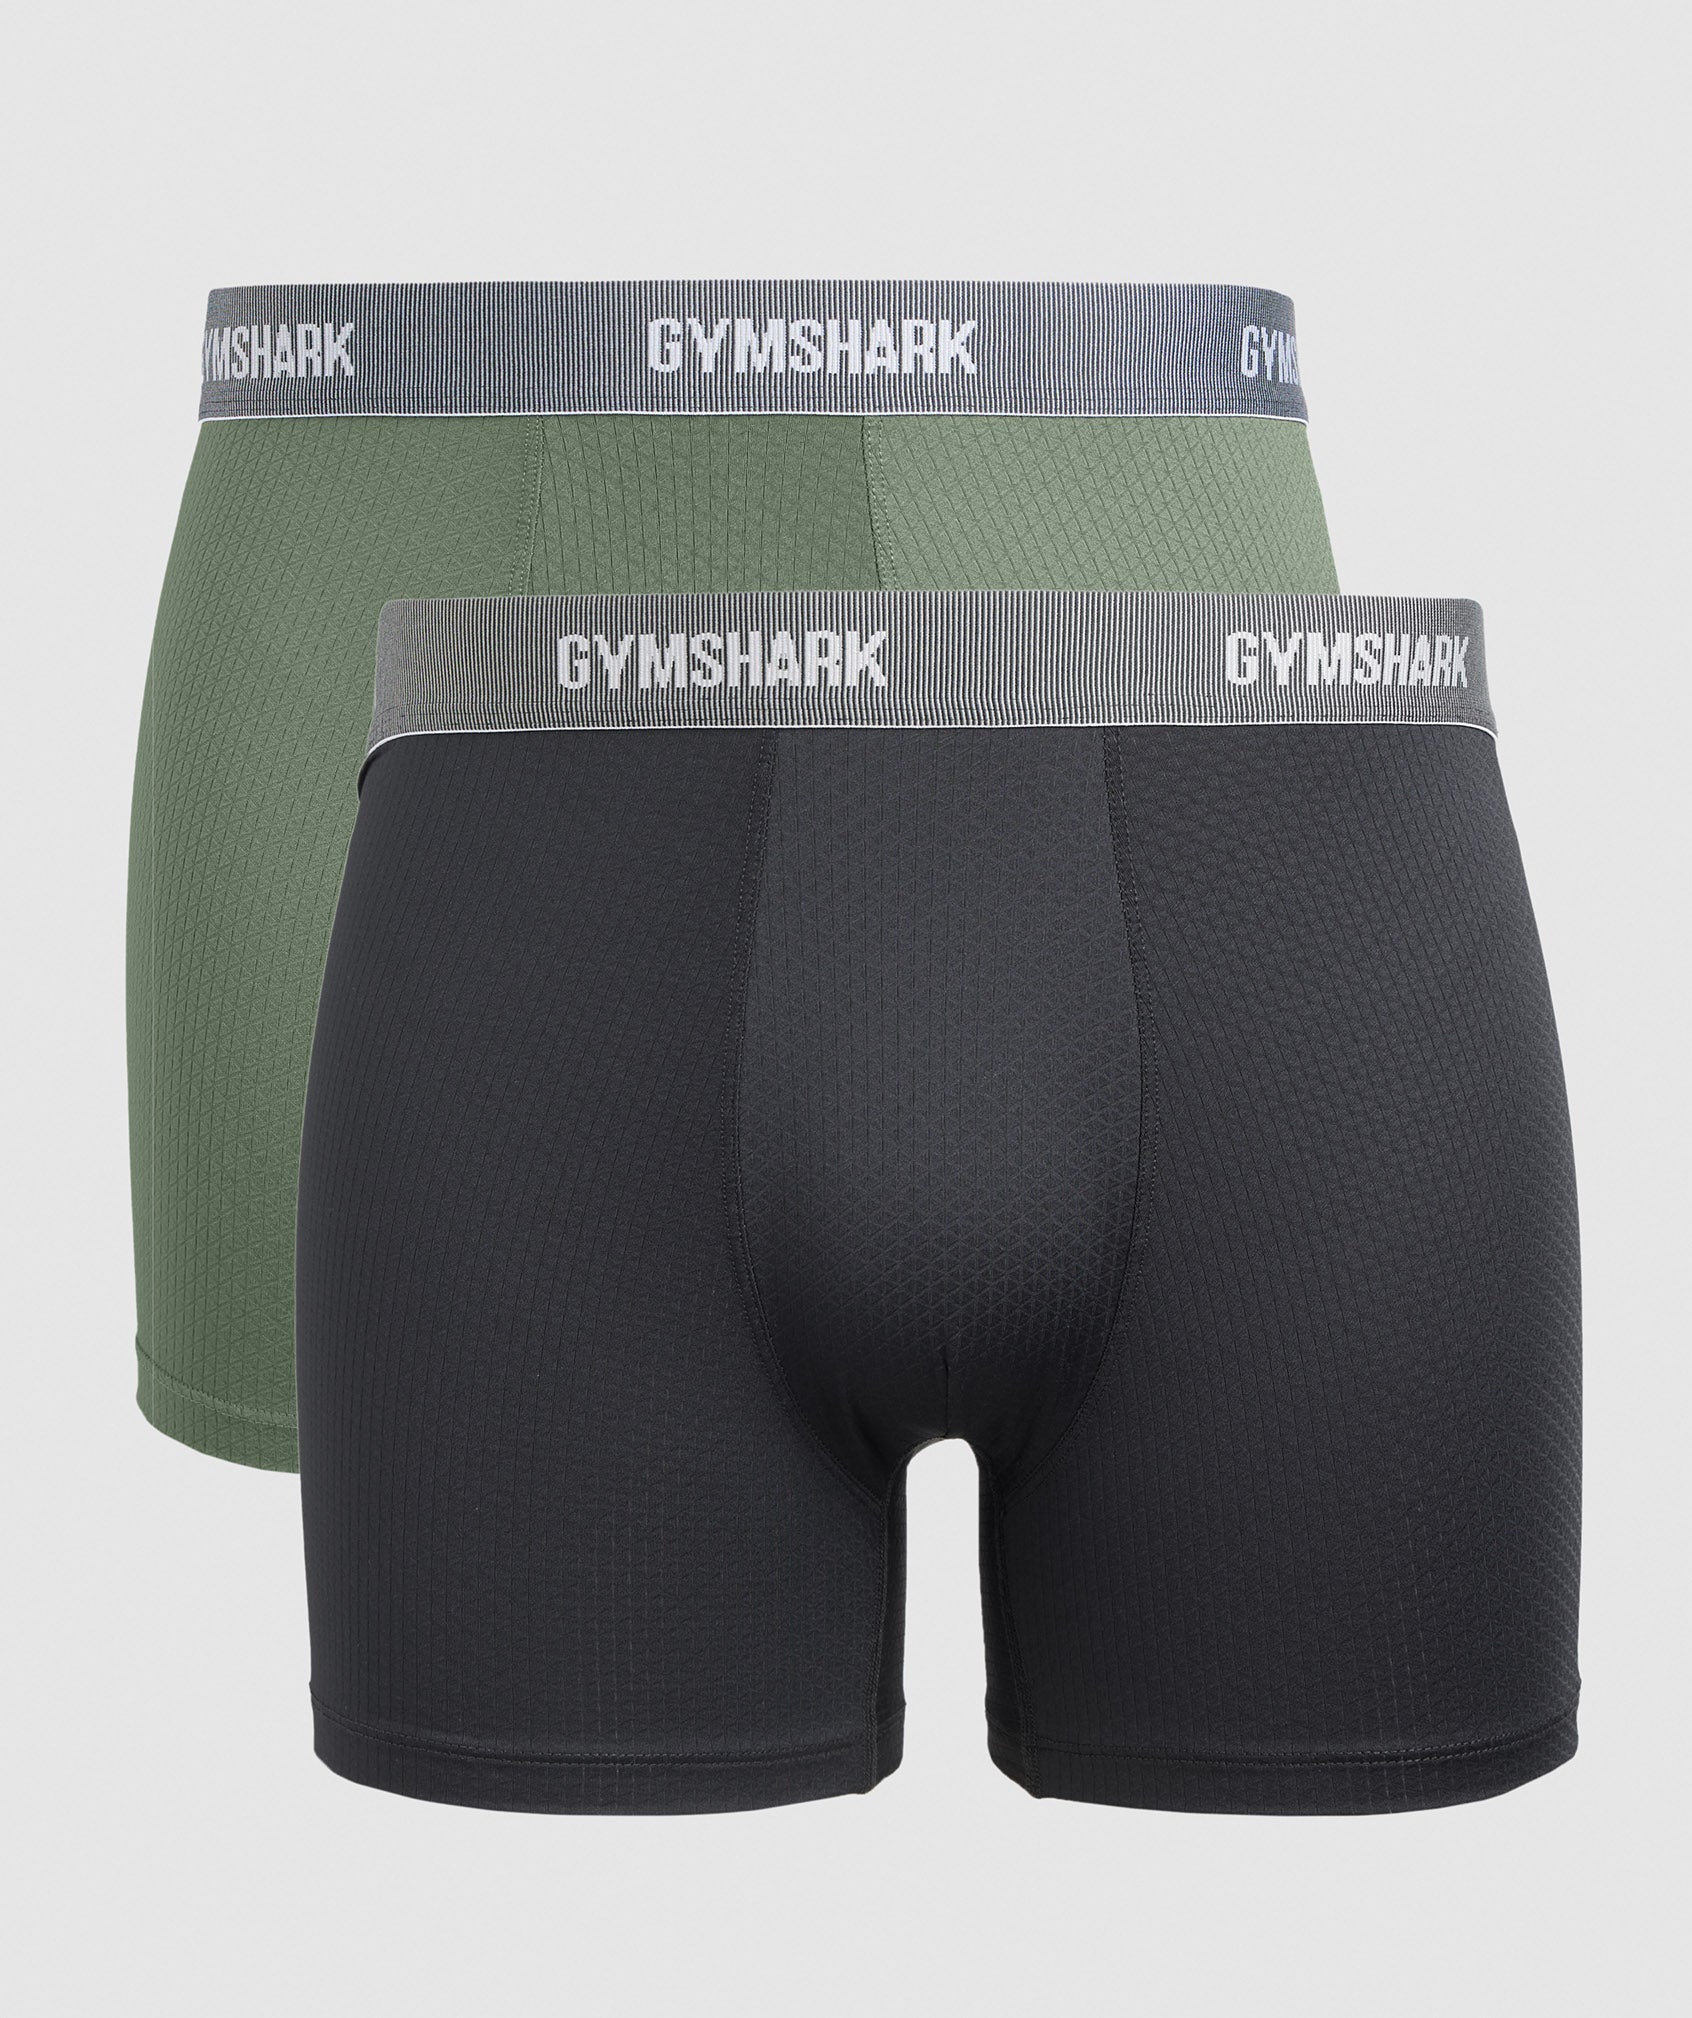 Sports Tech Boxers 2pk in {{variantColor} is out of stock